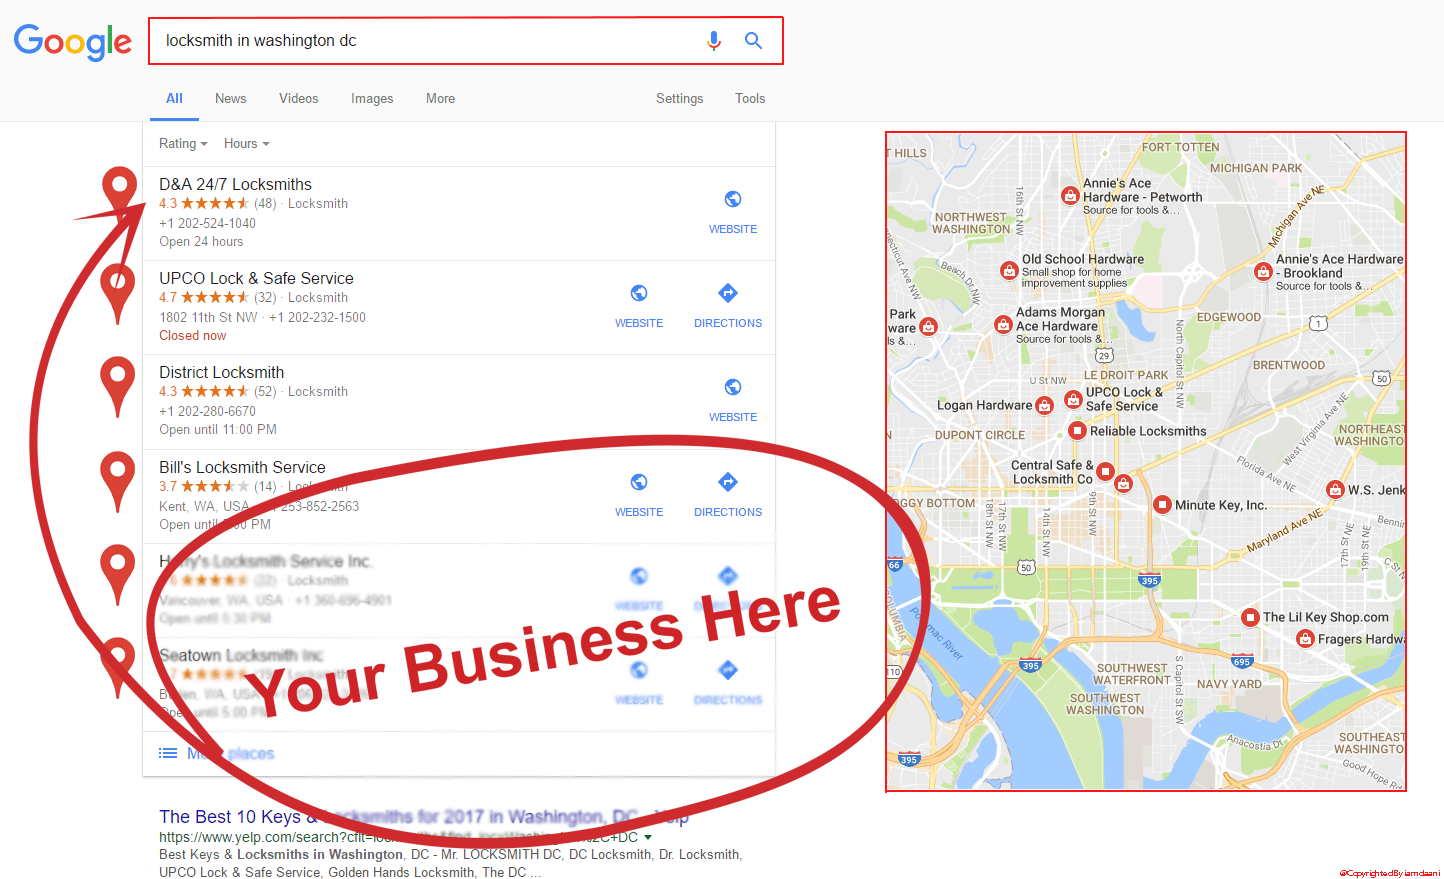 5 Best Practices for Google Maps and SEO - SunCity Advising